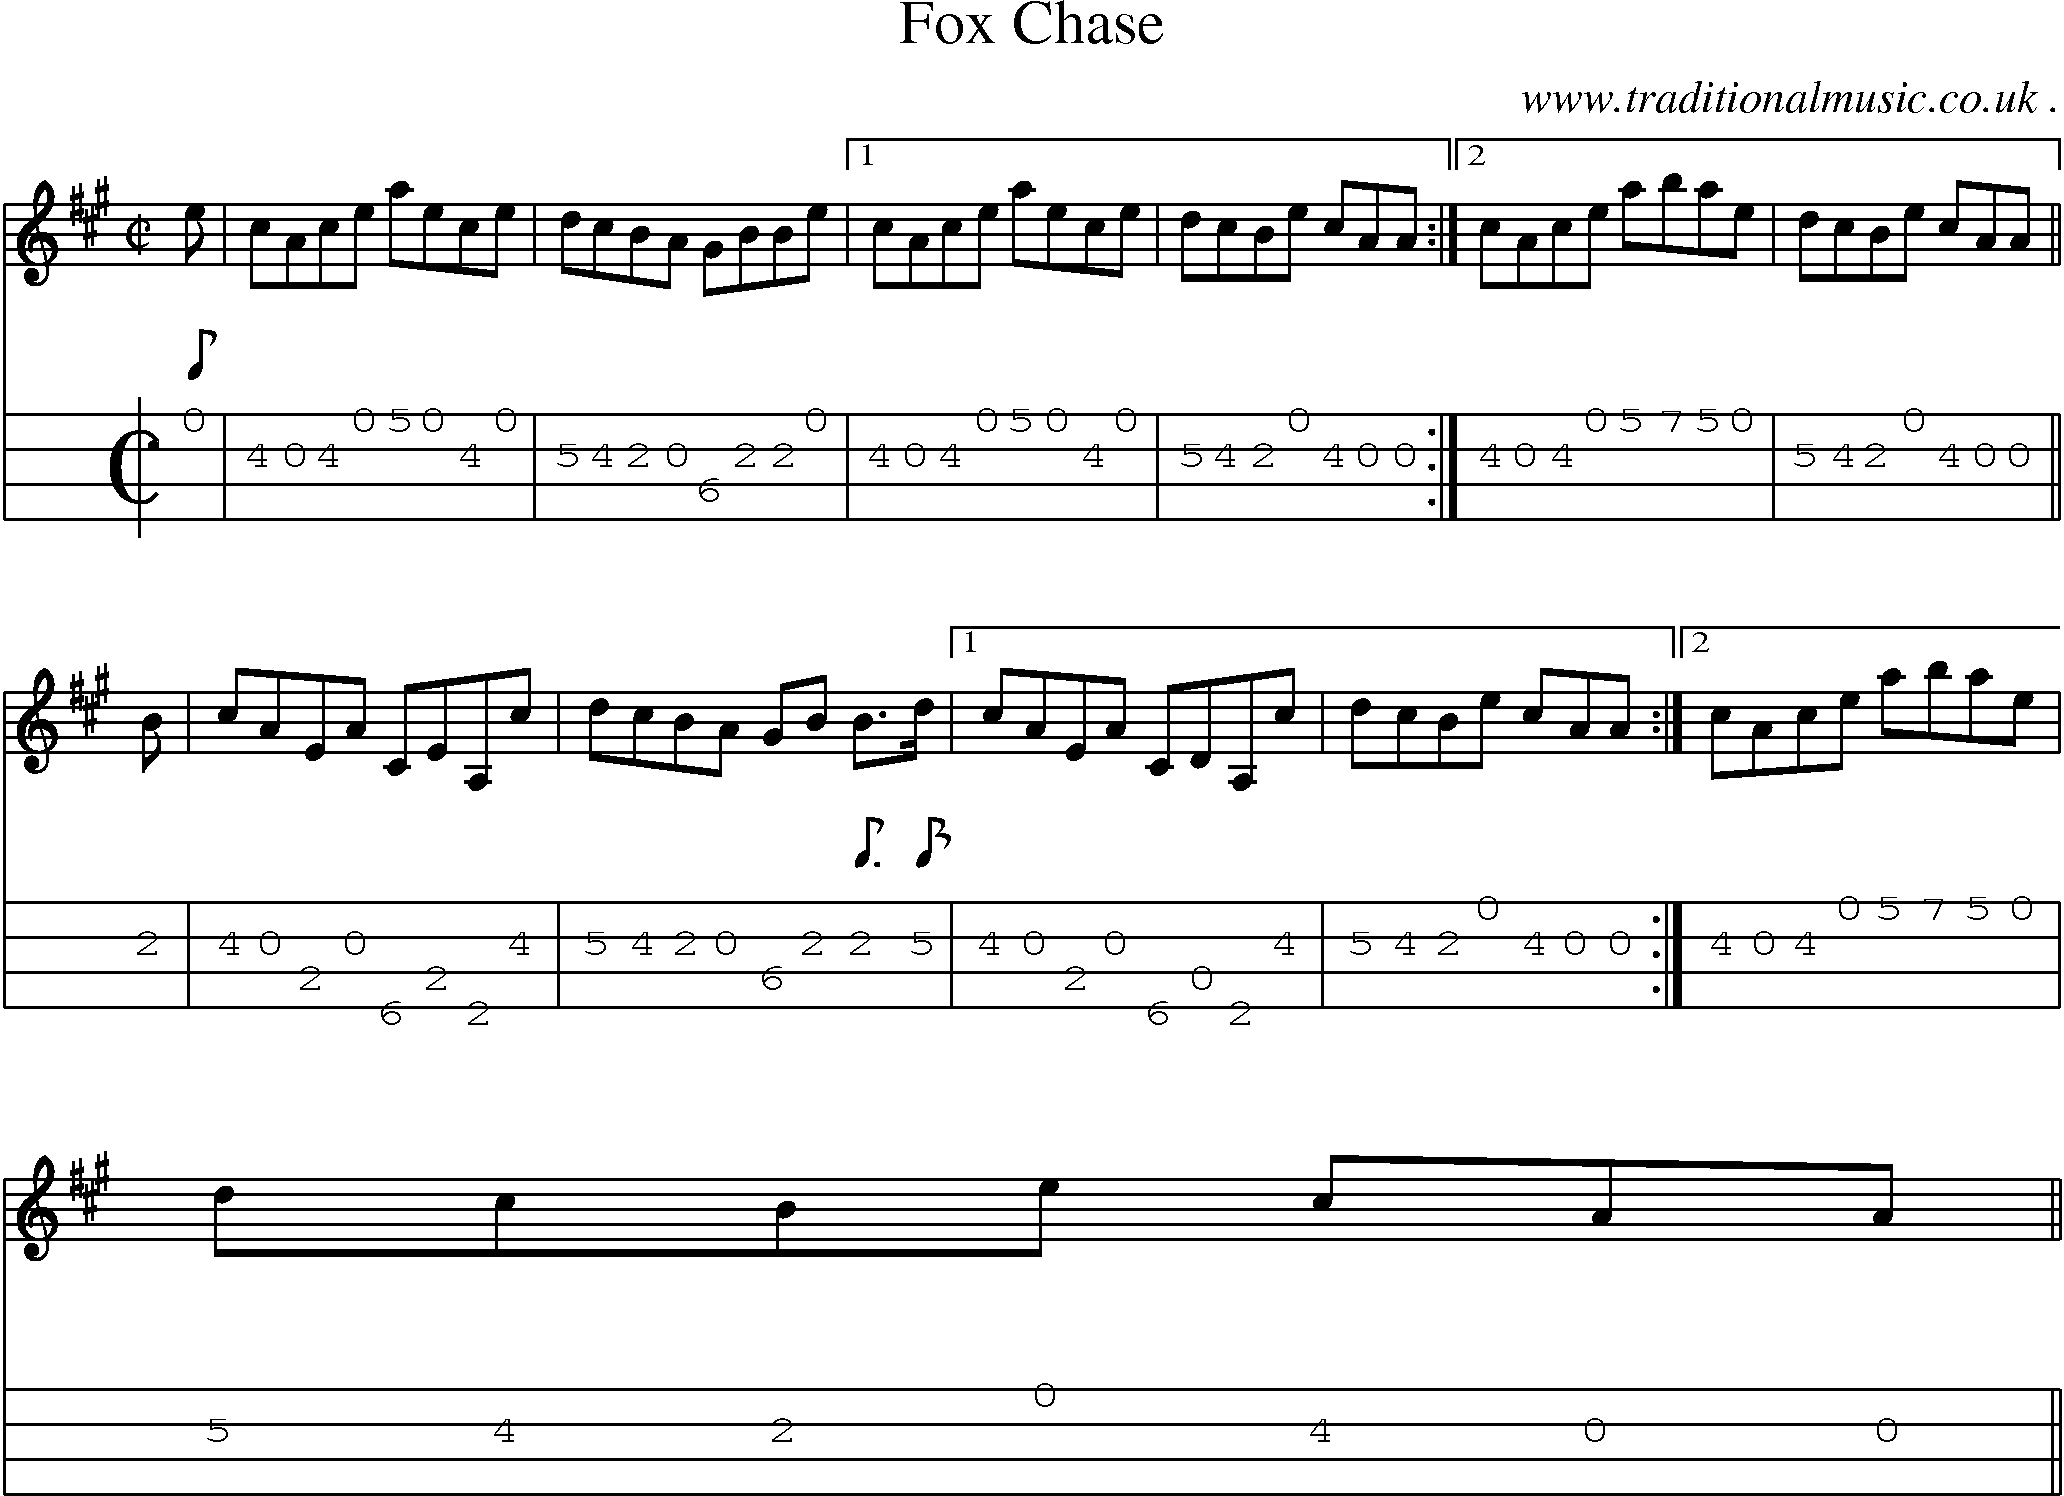 Sheet-music  score, Chords and Mandolin Tabs for Fox Chase